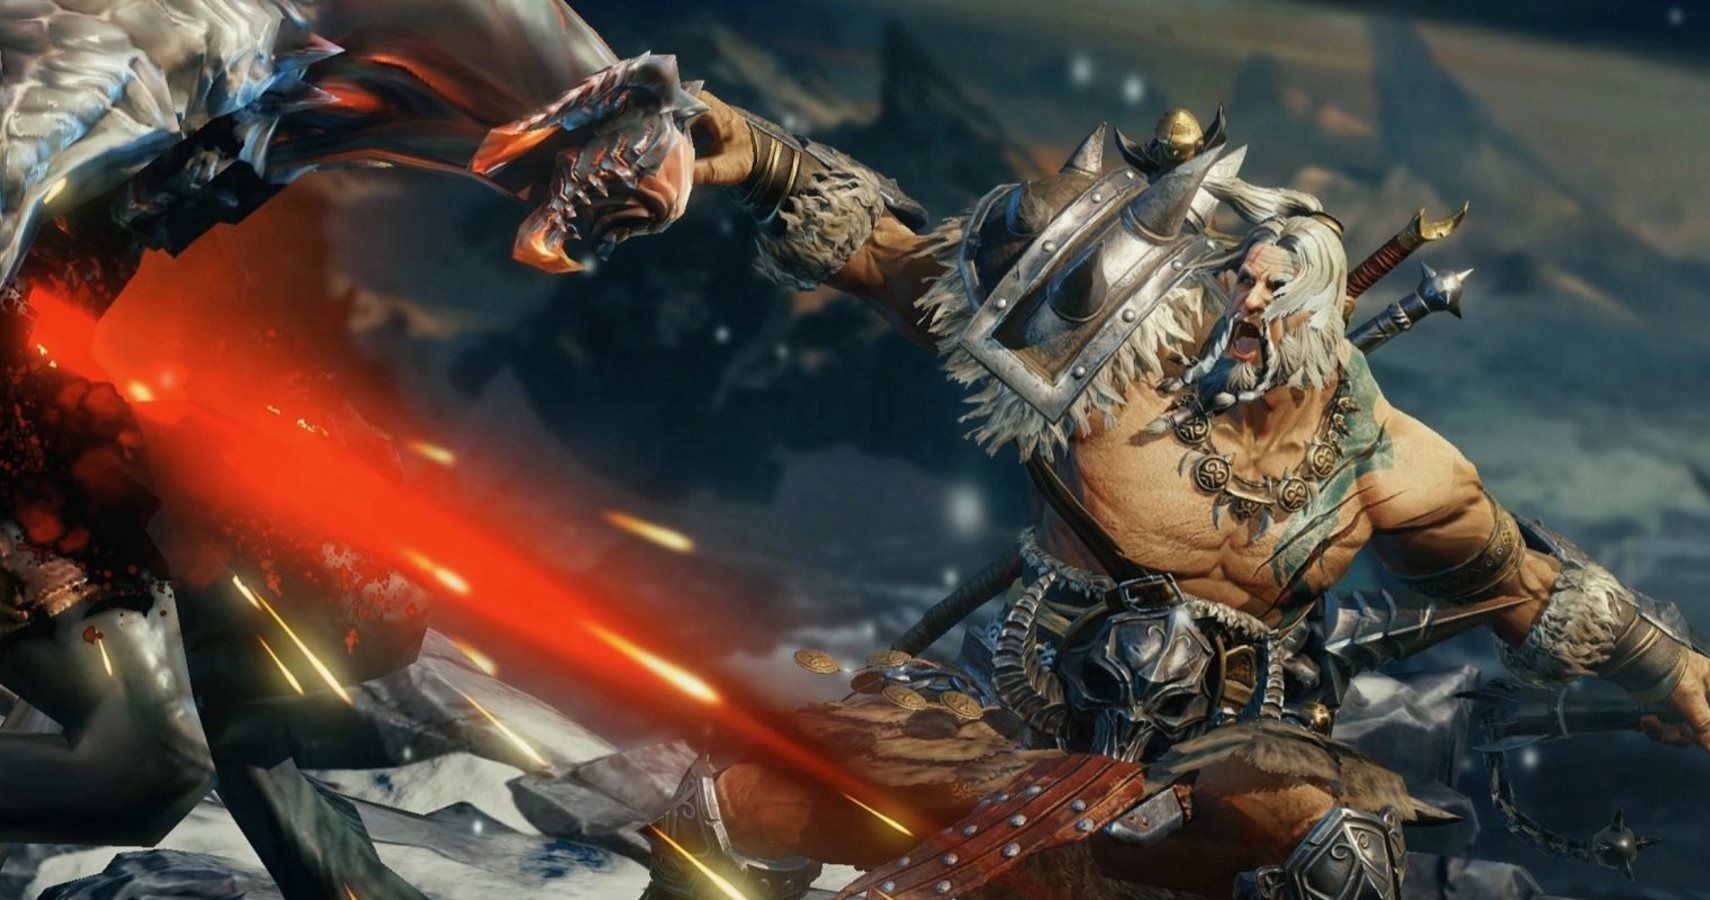 Fans Are Unhappy With Diablo Mobile Announcement, Call For Its Cancelation